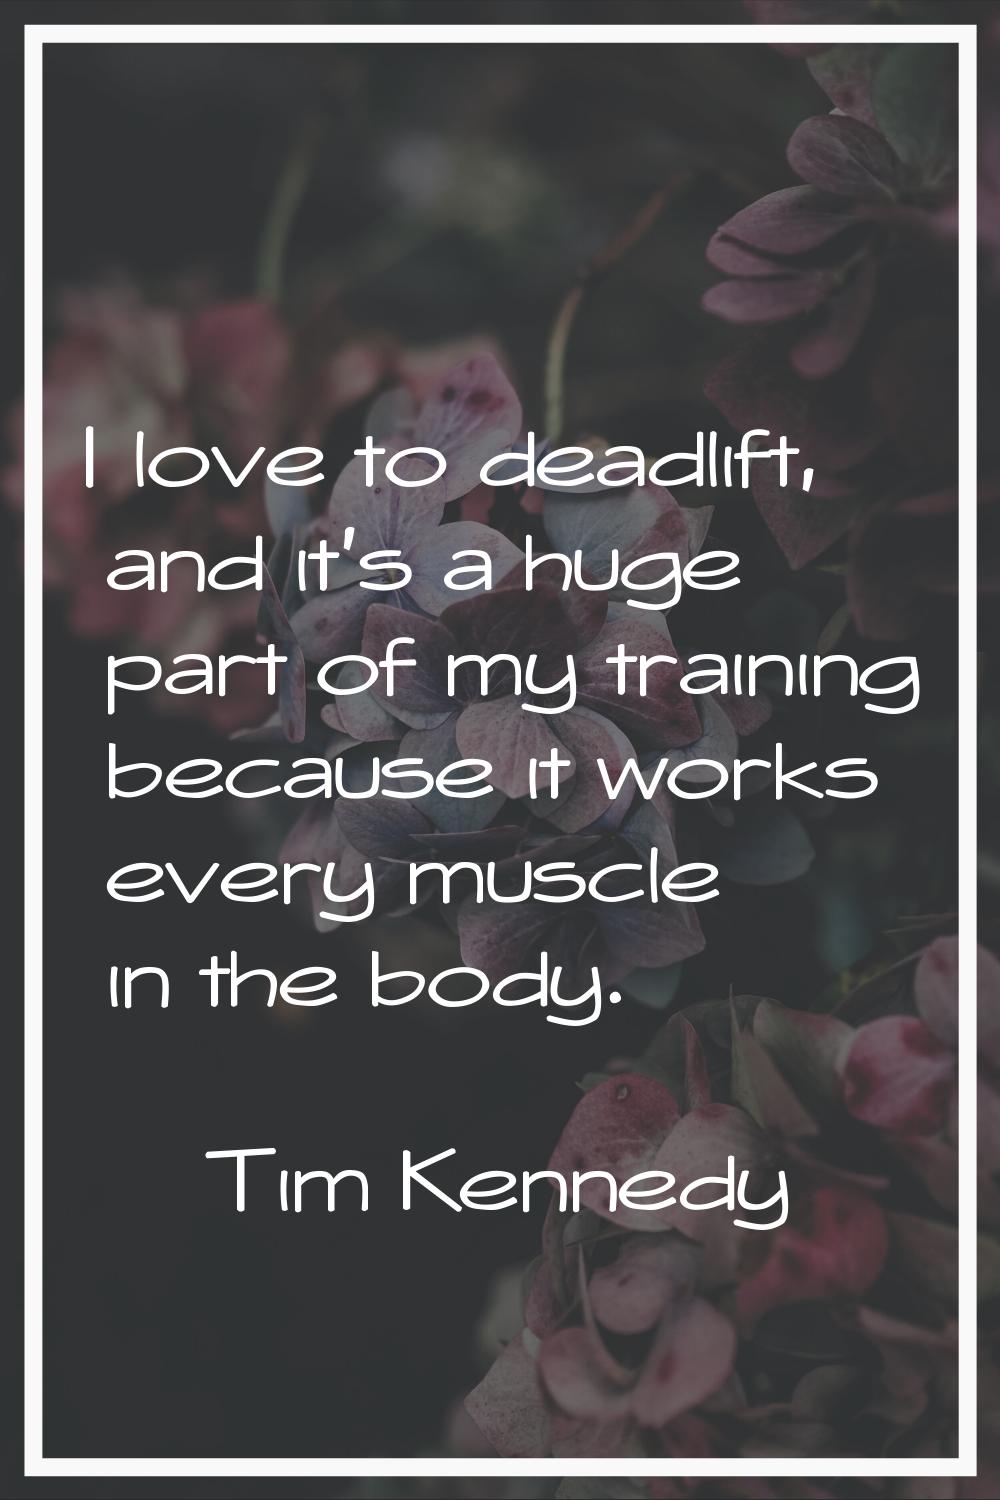 I love to deadlift, and it's a huge part of my training because it works every muscle in the body.